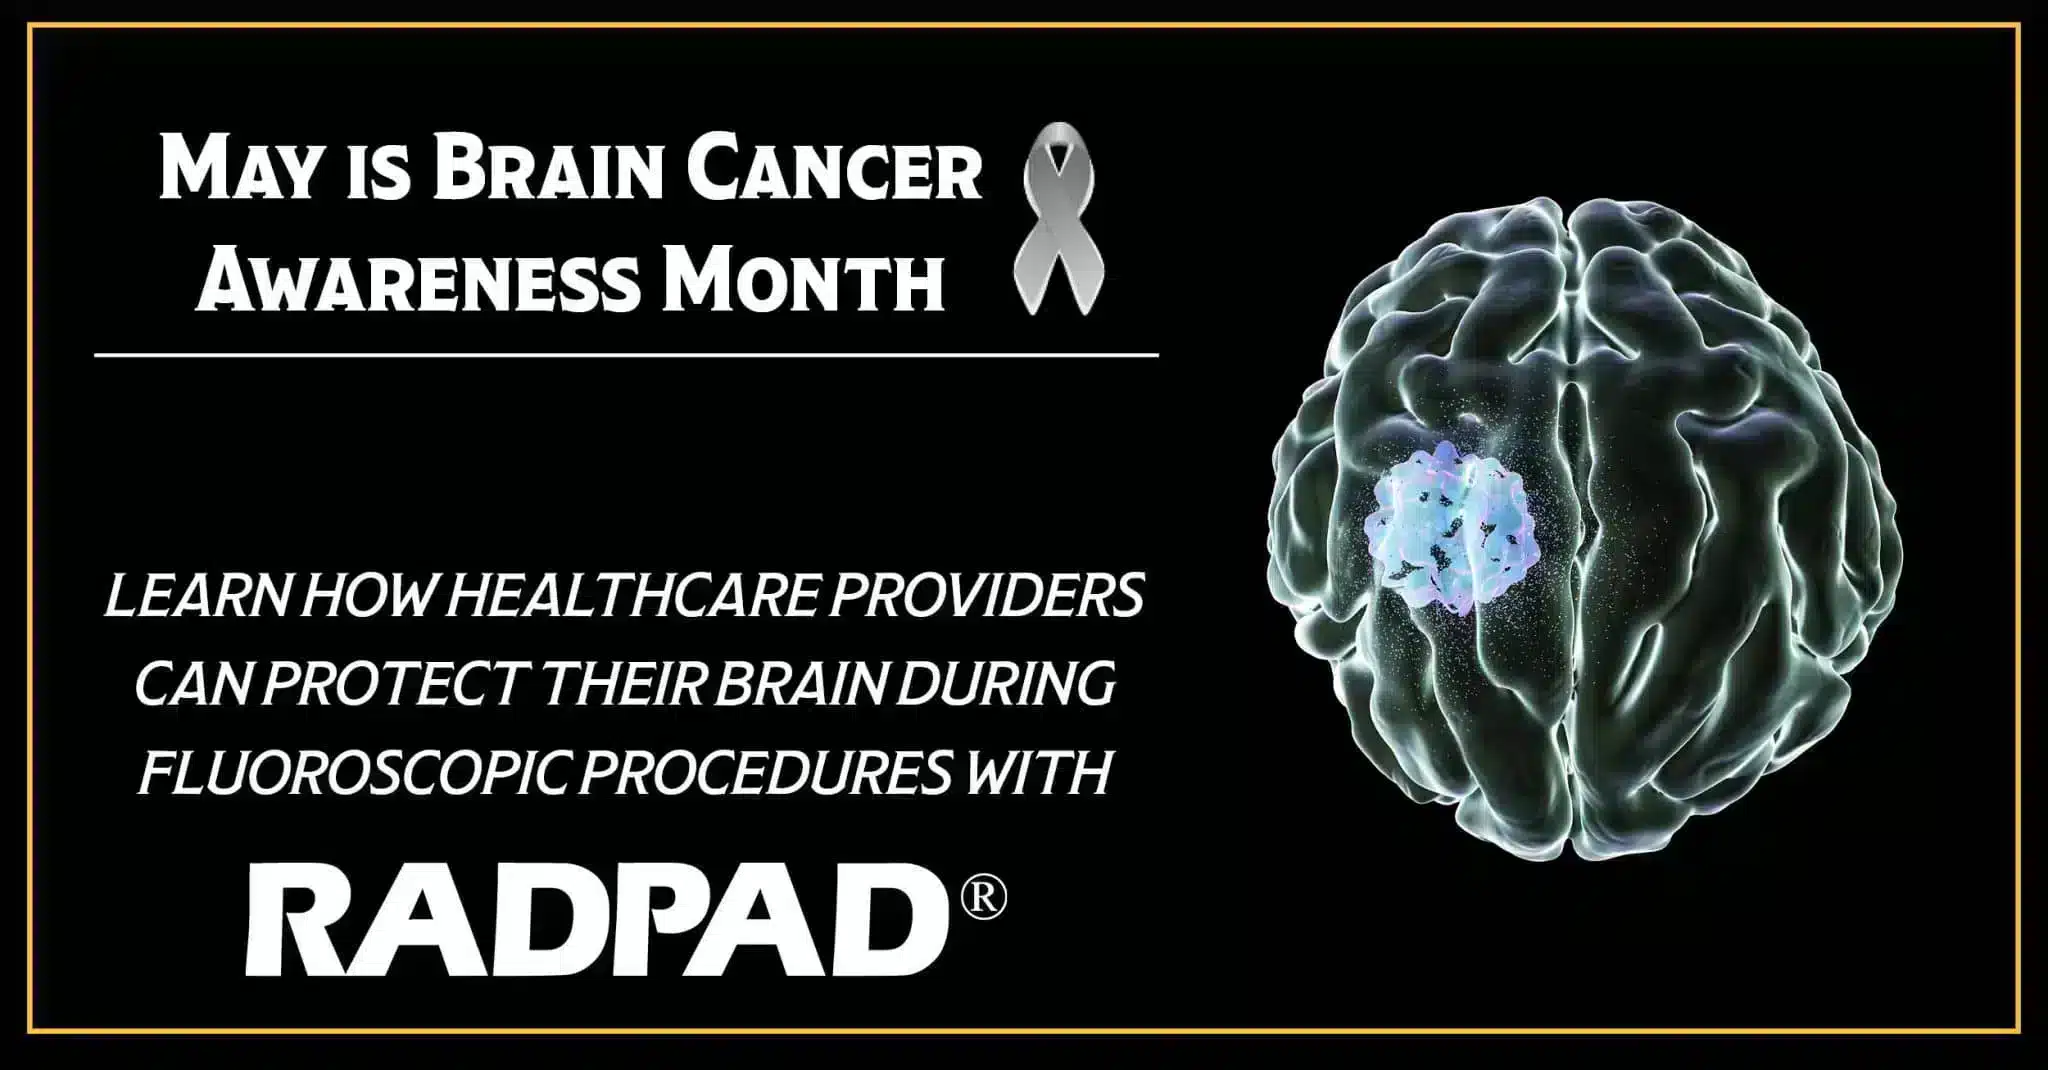 Learn how healthcare providers can protect their brain during fluoroscopic procedures with Radpad